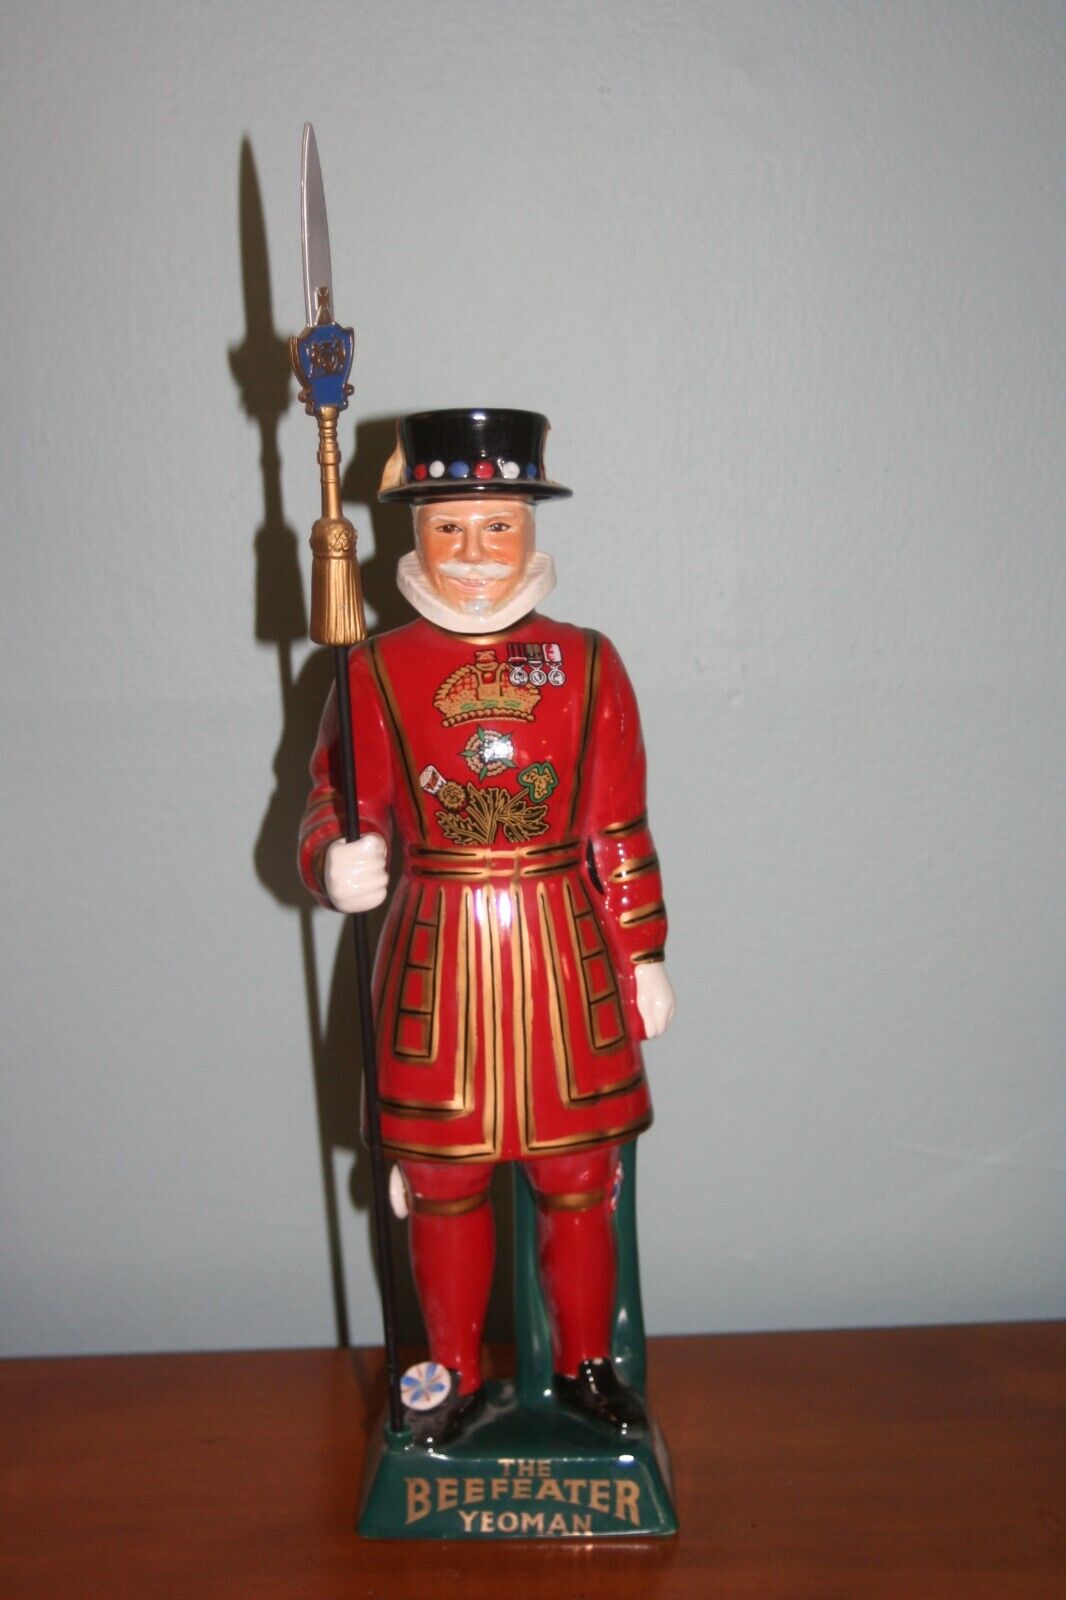 Vintage 1960s The Beefeater Yeoman Gin Ceramic Decanter Bottle Carlton Ware 